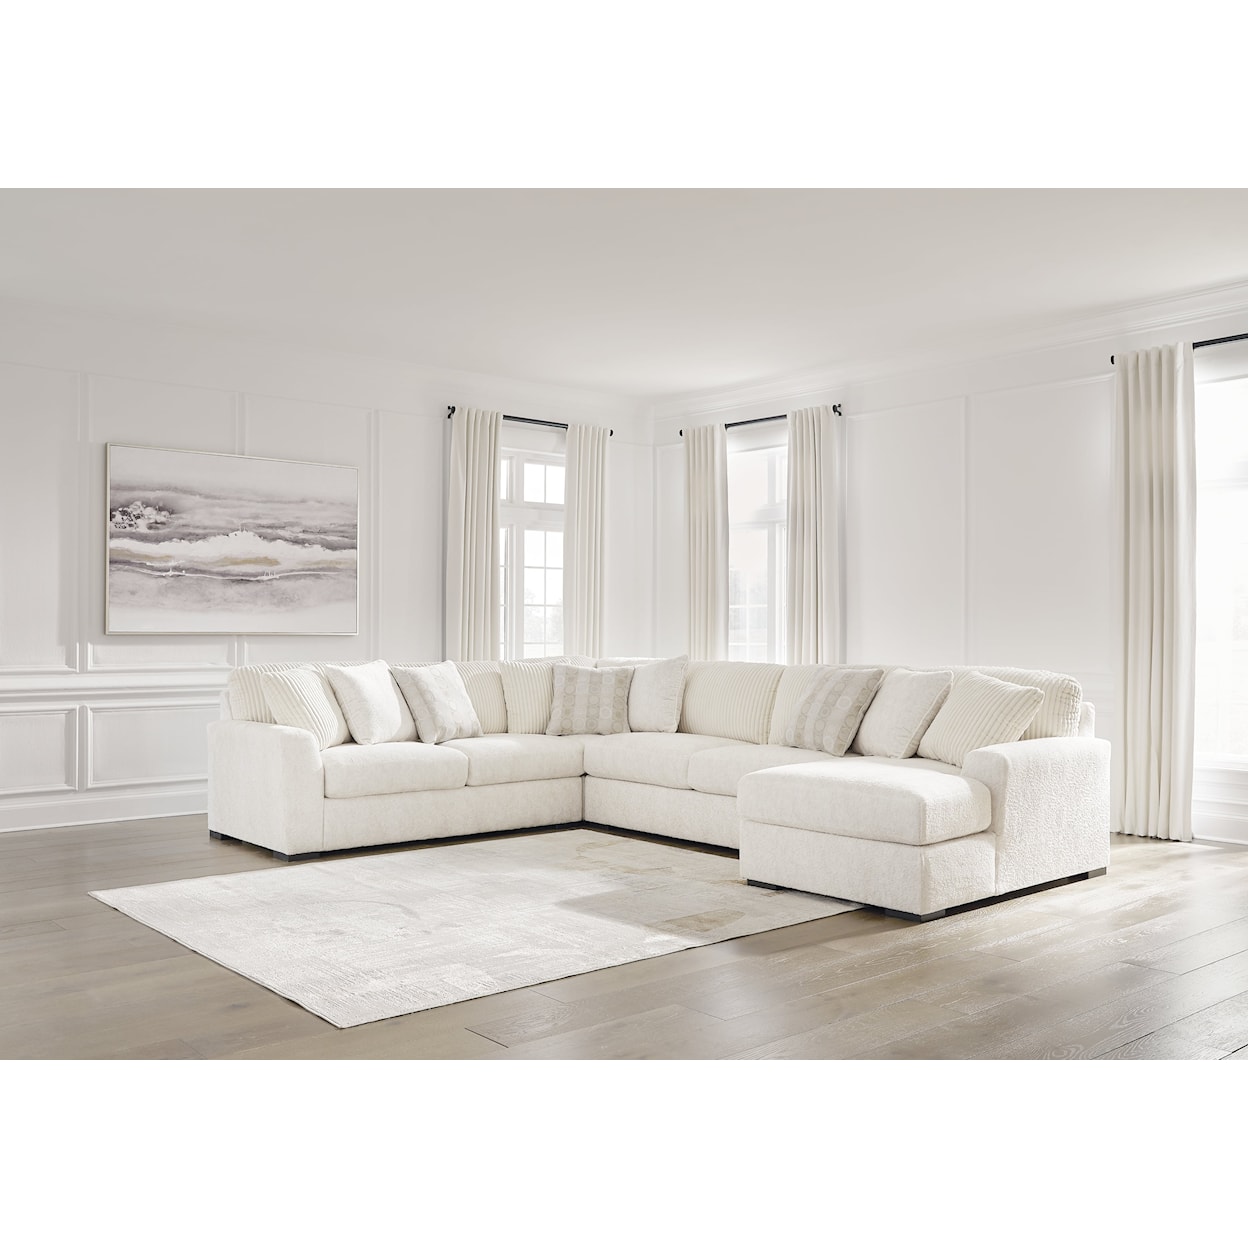 Signature Design by Ashley Chessington 4-Piece Sectional With Chaise